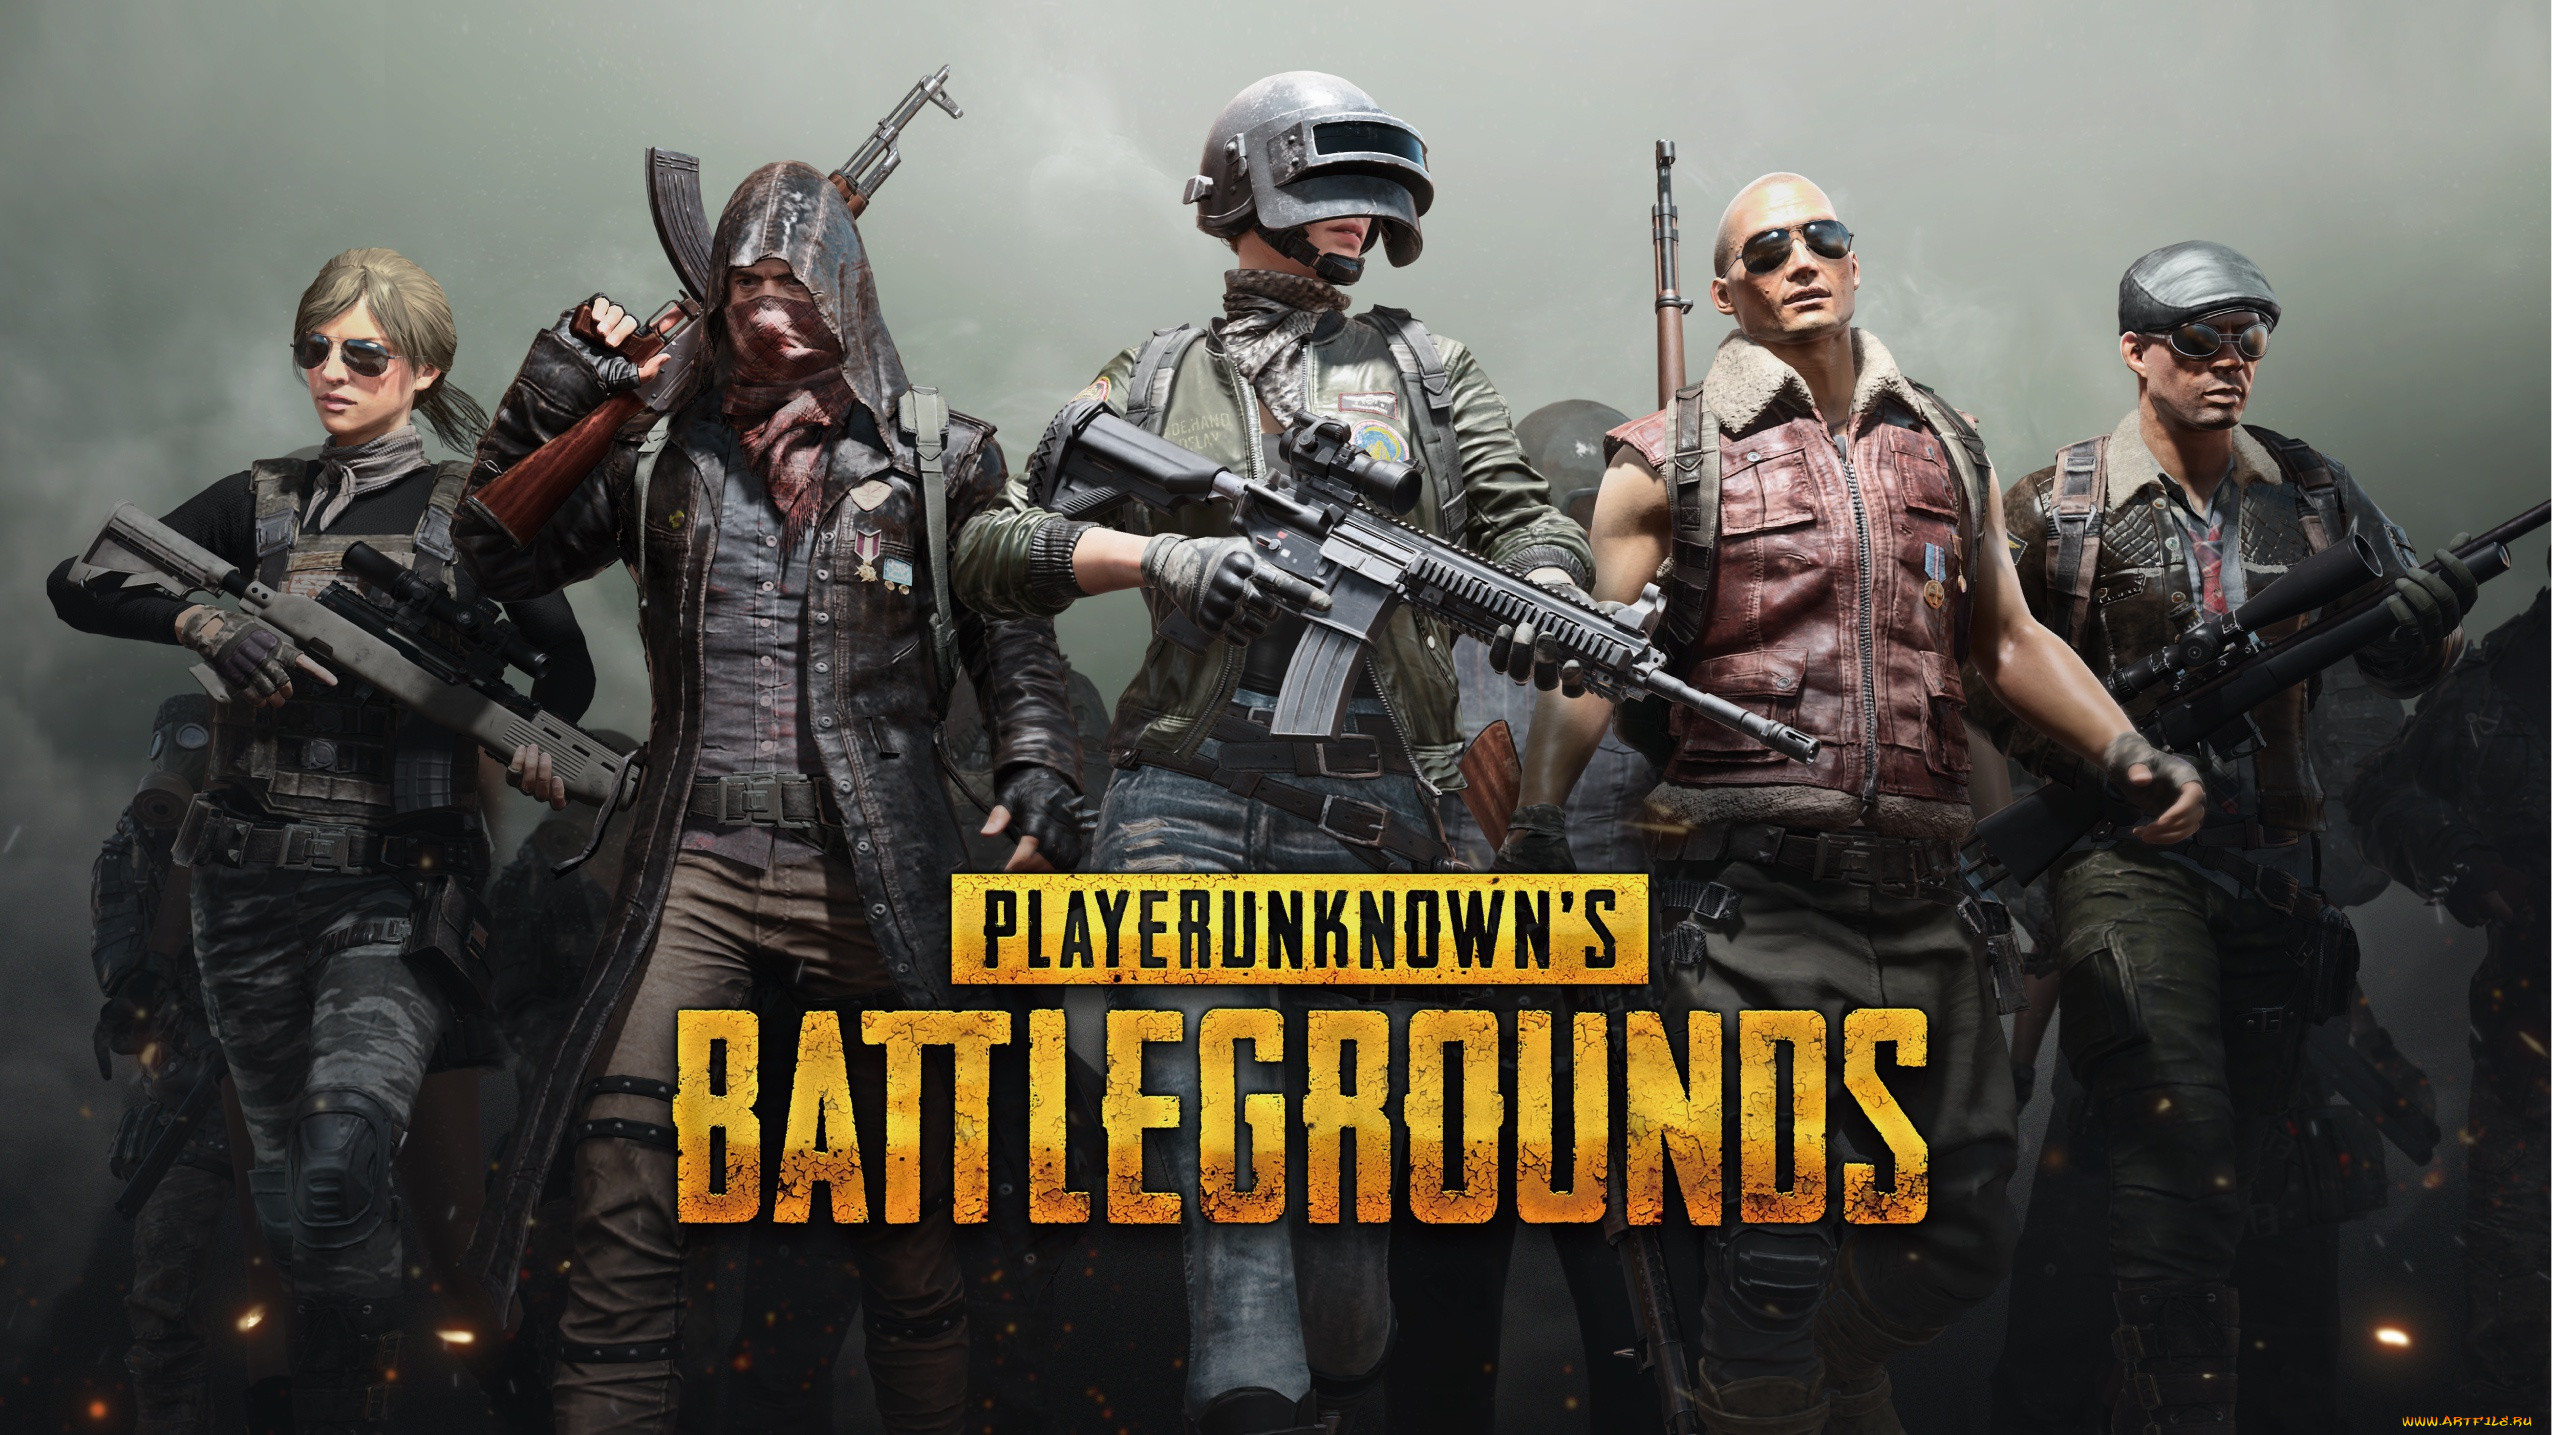  , playerunknown`s battlegrounds, , , , , game, character, , , , playerunknown's, battlegrounds, pubg